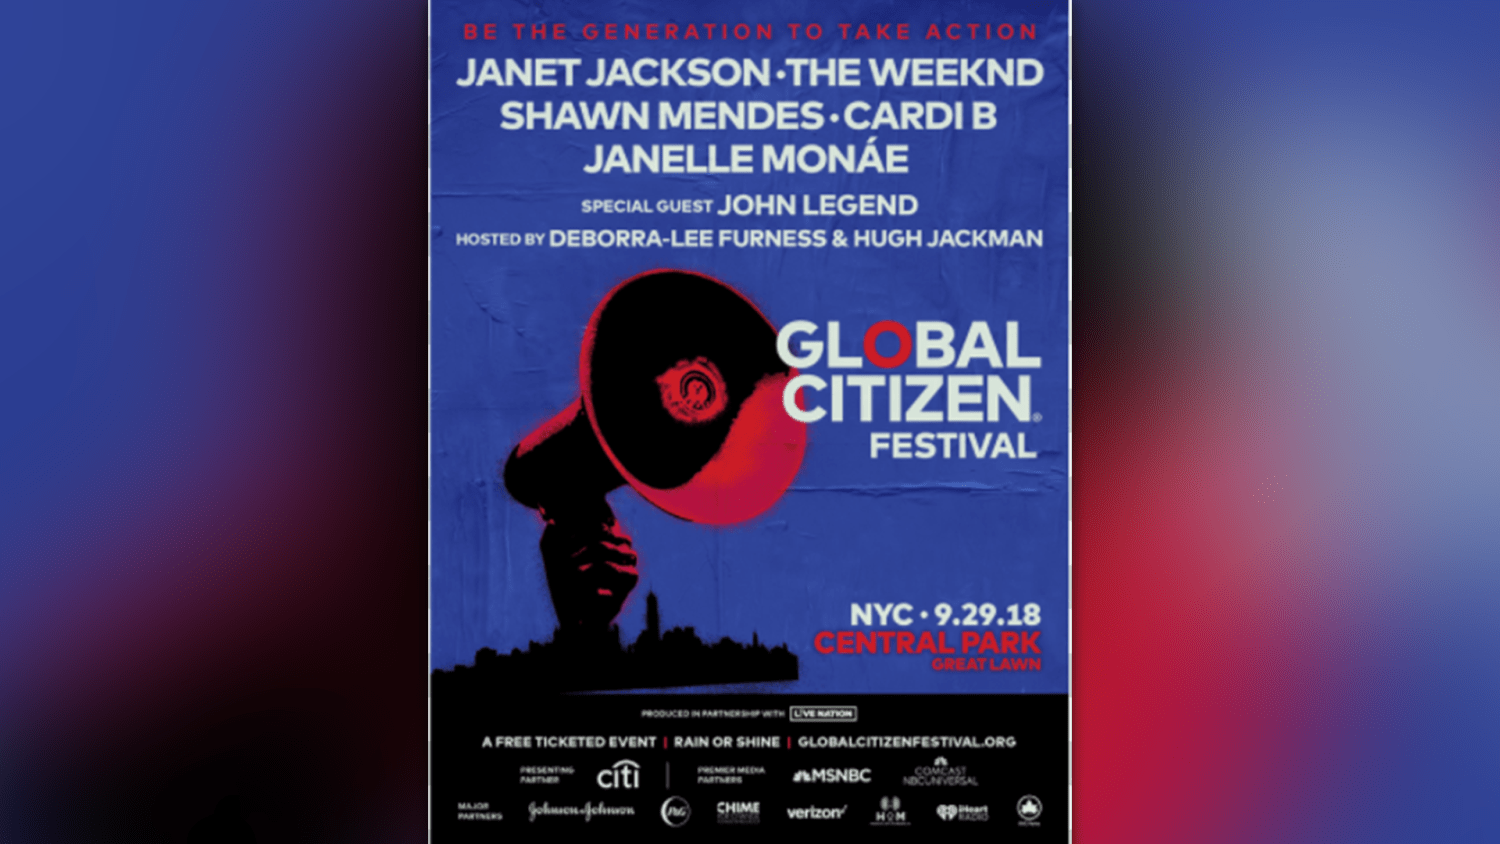 Global Citizen Festival 2018 NYC lineup has been announced